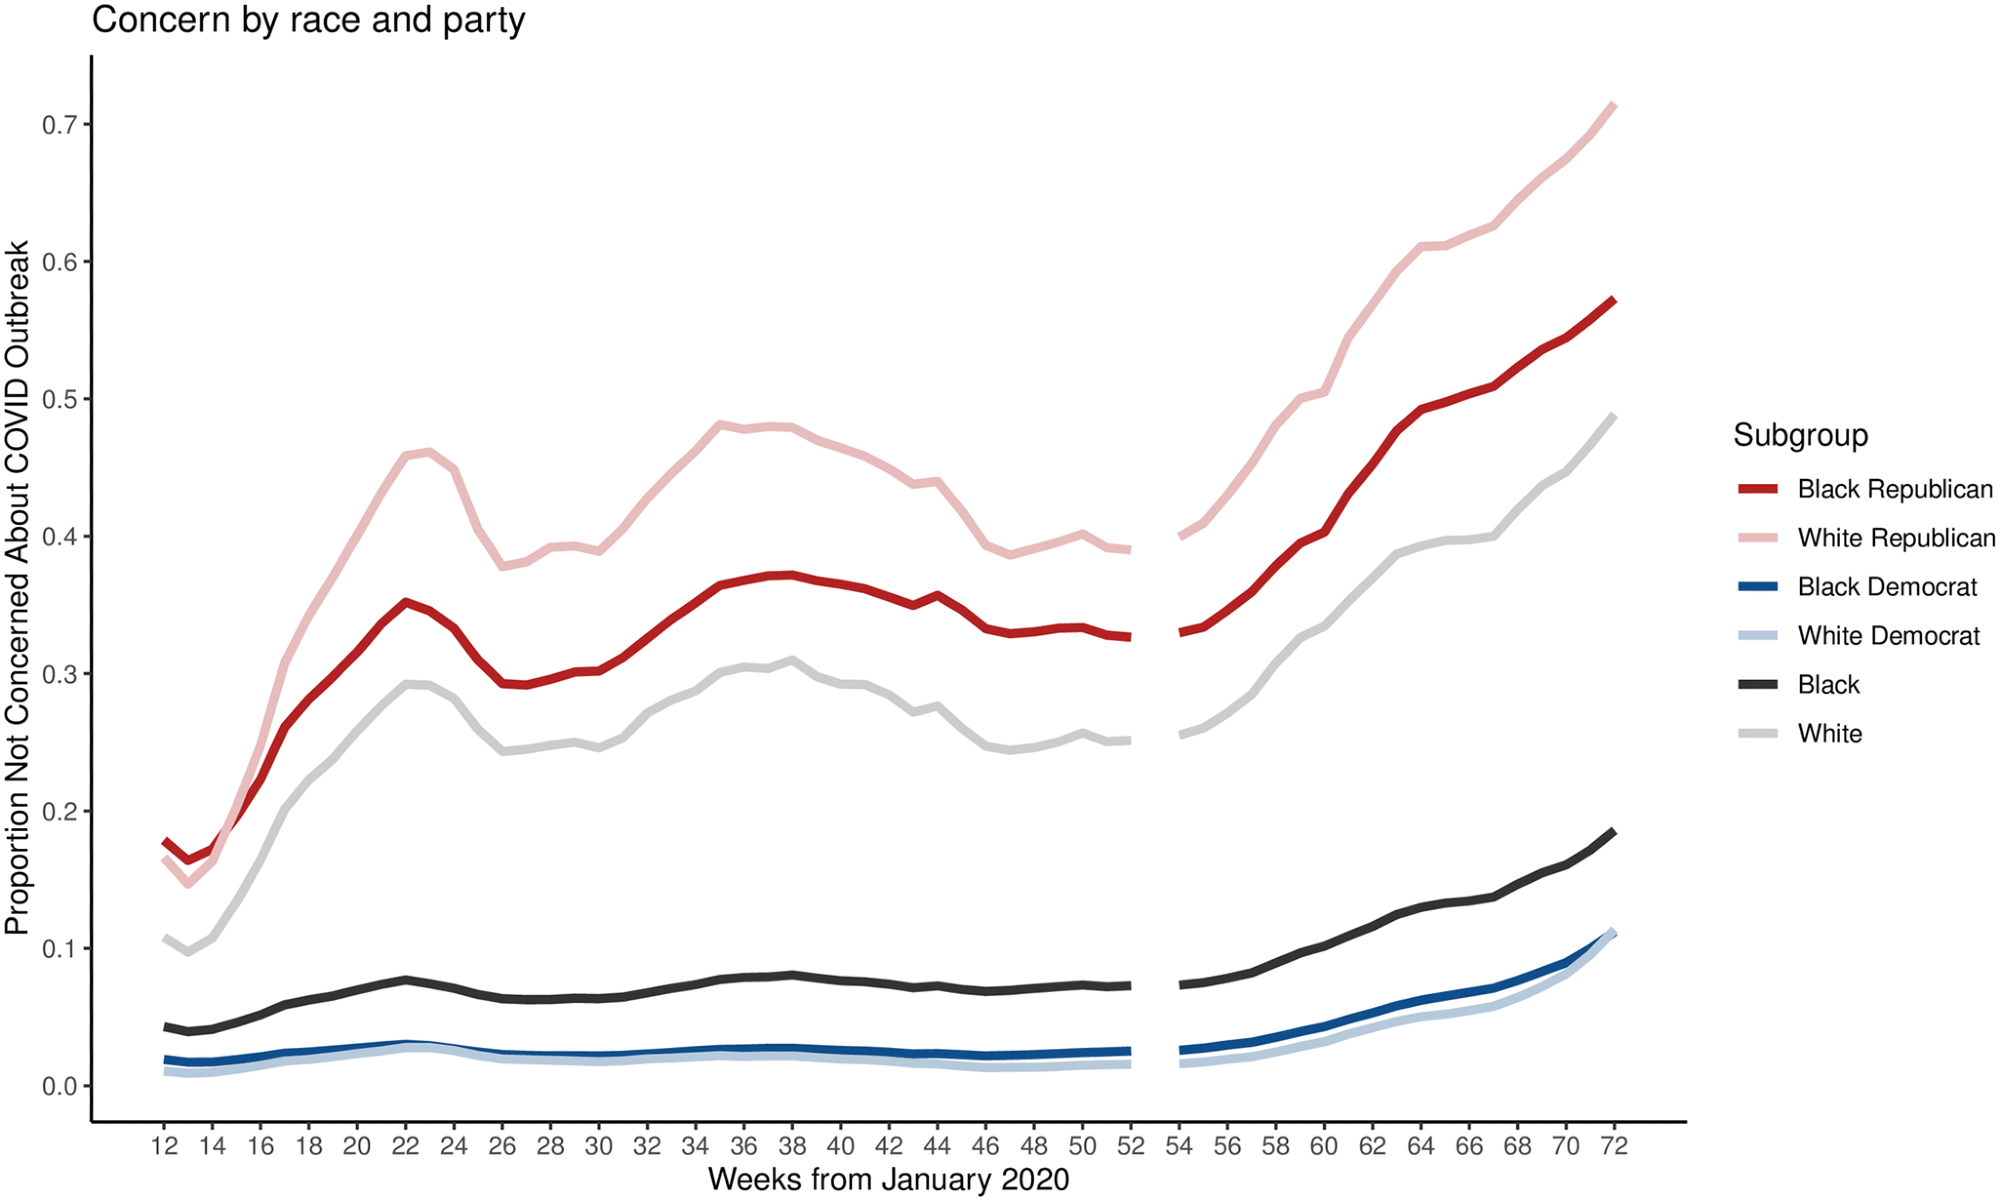 Public concern about local outbreak of COVID-19 by party and race. Differences in proportion of Americans not concerned with COVID-19 by party (holding race constant) are larger than differences in proportions by race (holding party constant), suggestion partisan disparities in concern dominate racial disparities.